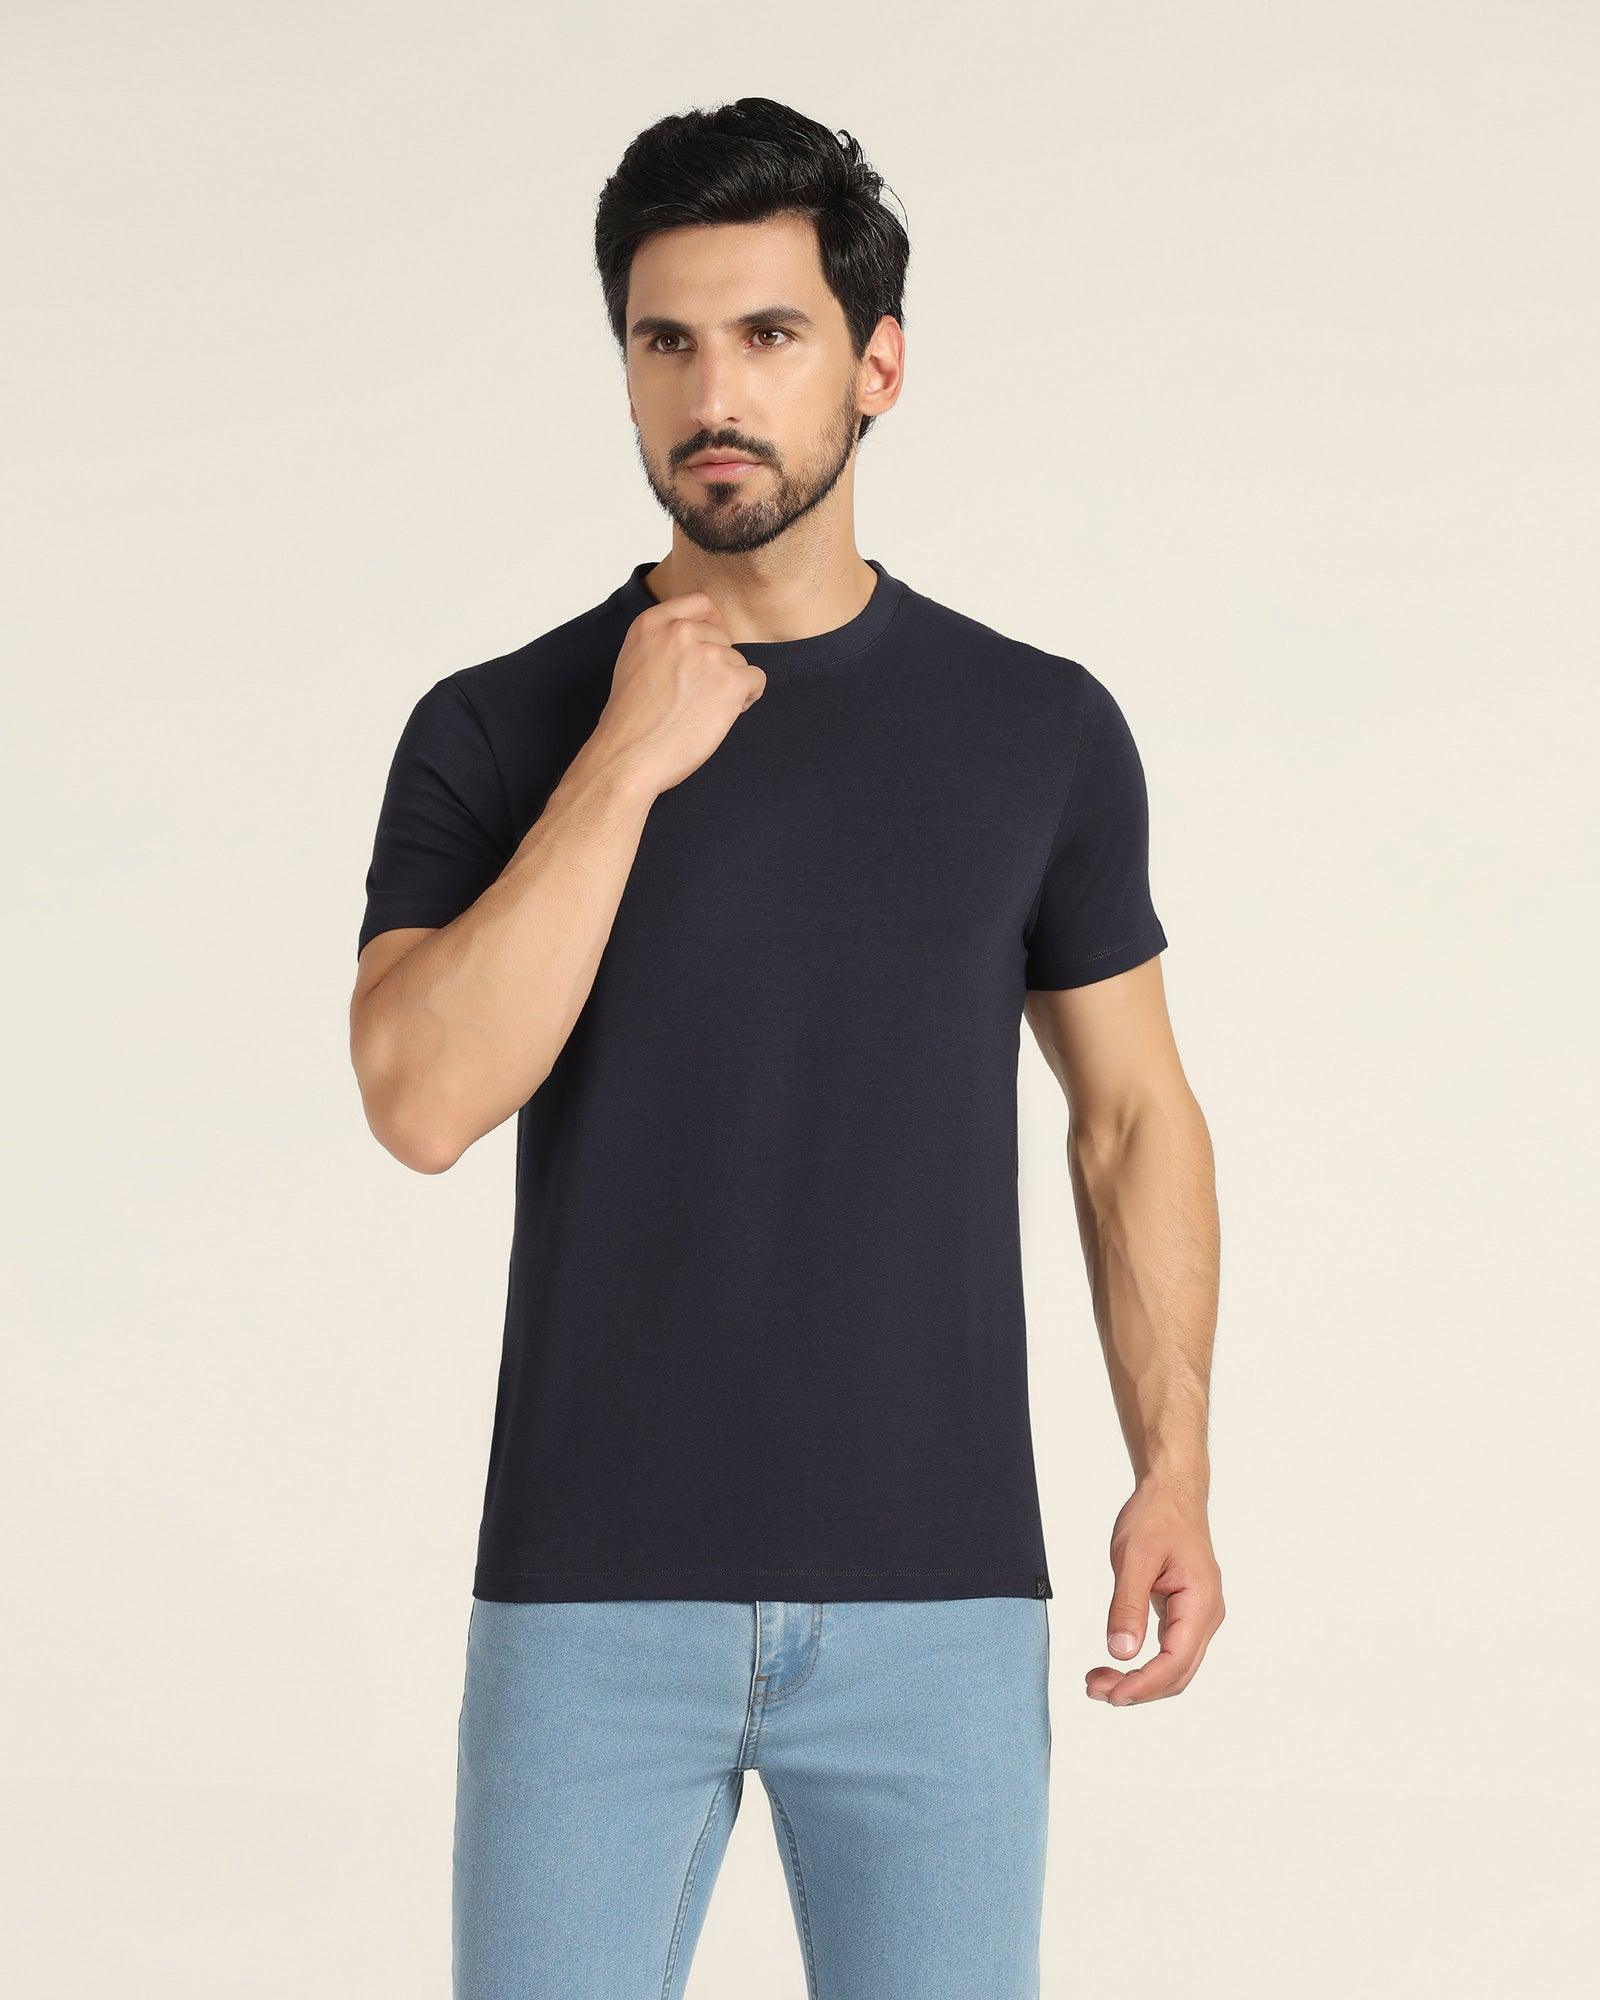 Crew Neck Navy Solid T Shirt - Holan